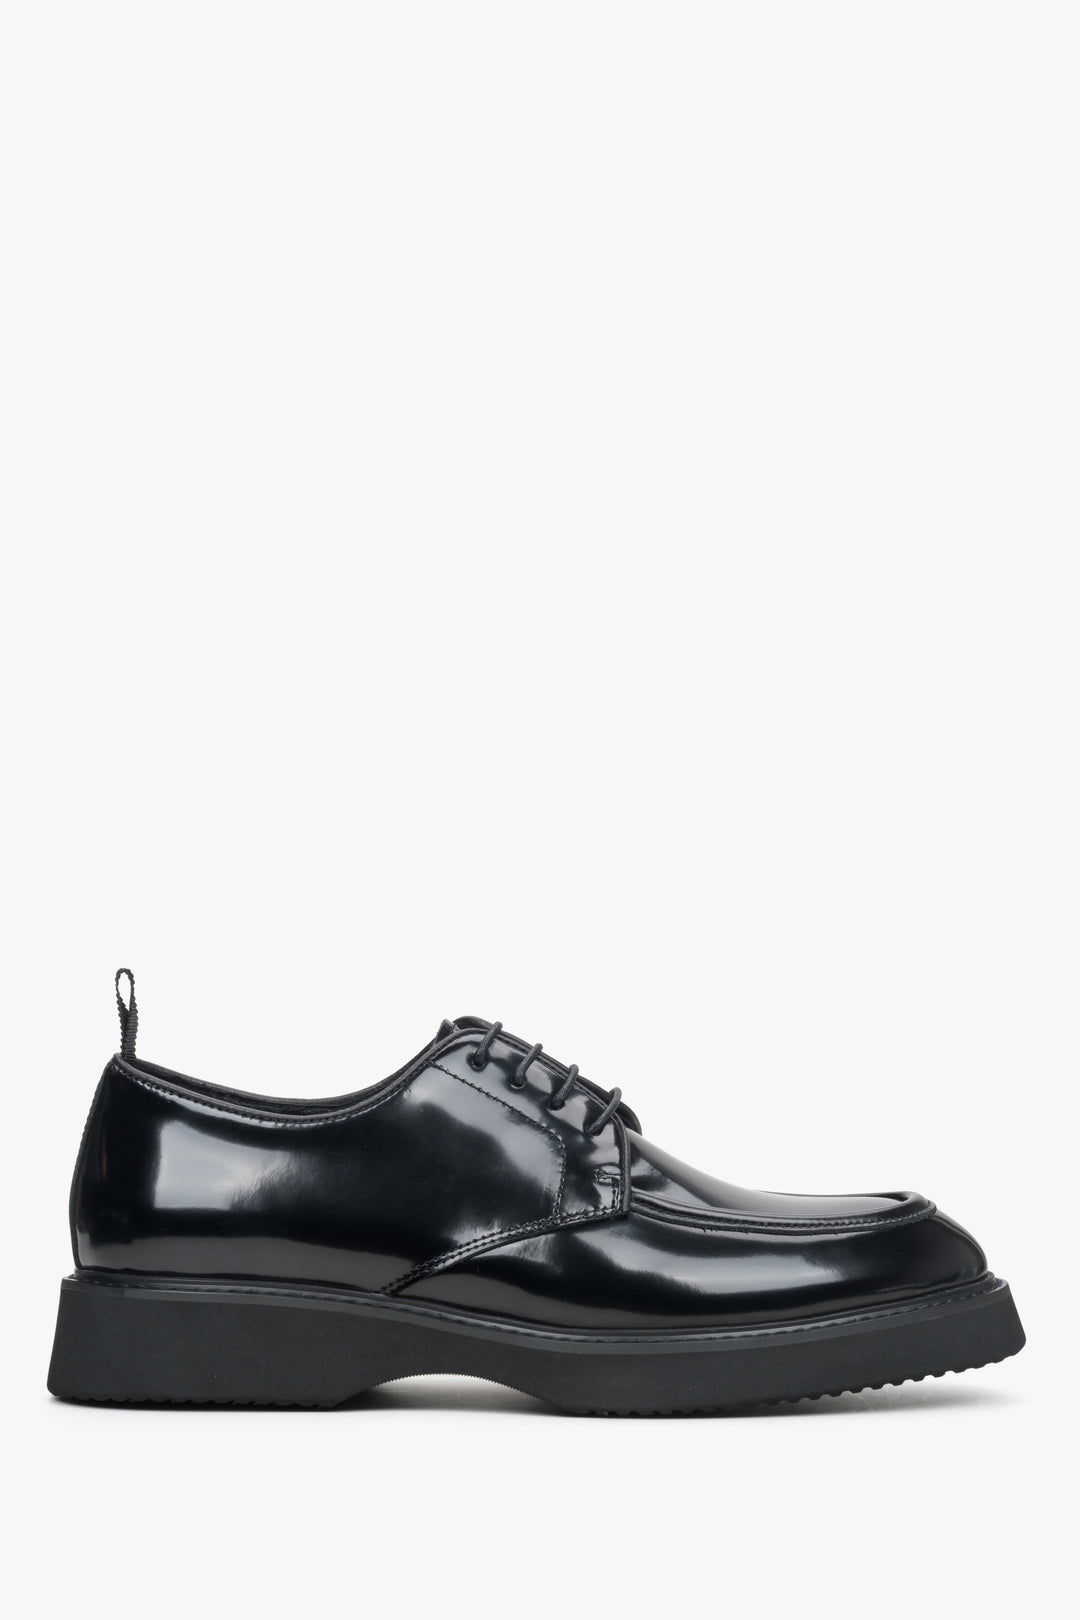 Men's Black Lace-up Brogues made of Genuine Patent Leather Estro ER00113939.